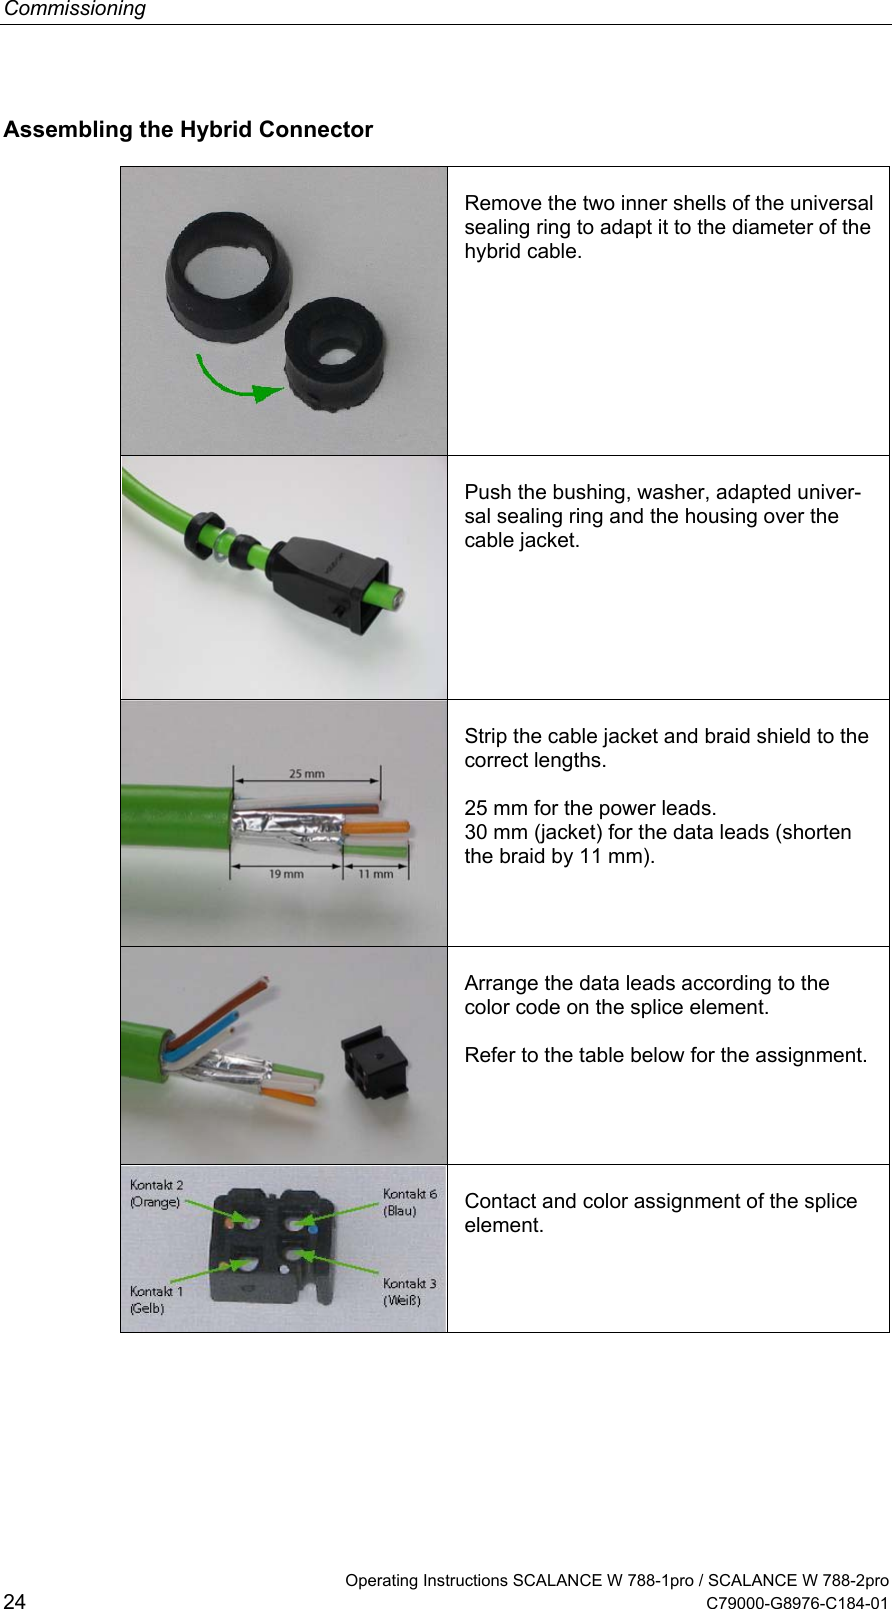 Commissioning   Operating Instructions SCALANCE W 788-1pro / SCALANCE W 788-2pro 24  C79000-G8976-C184-01 Assembling the Hybrid Connector   Remove the two inner shells of the universal sealing ring to adapt it to the diameter of the hybrid cable.       Push the bushing, washer, adapted univer-sal sealing ring and the housing over the cable jacket.  Strip the cable jacket and braid shield to the correct lengths.  25 mm for the power leads. 30 mm (jacket) for the data leads (shorten the braid by 11 mm).  Arrange the data leads according to the color code on the splice element.  Refer to the table below for the assignment.  Contact and color assignment of the splice element.  